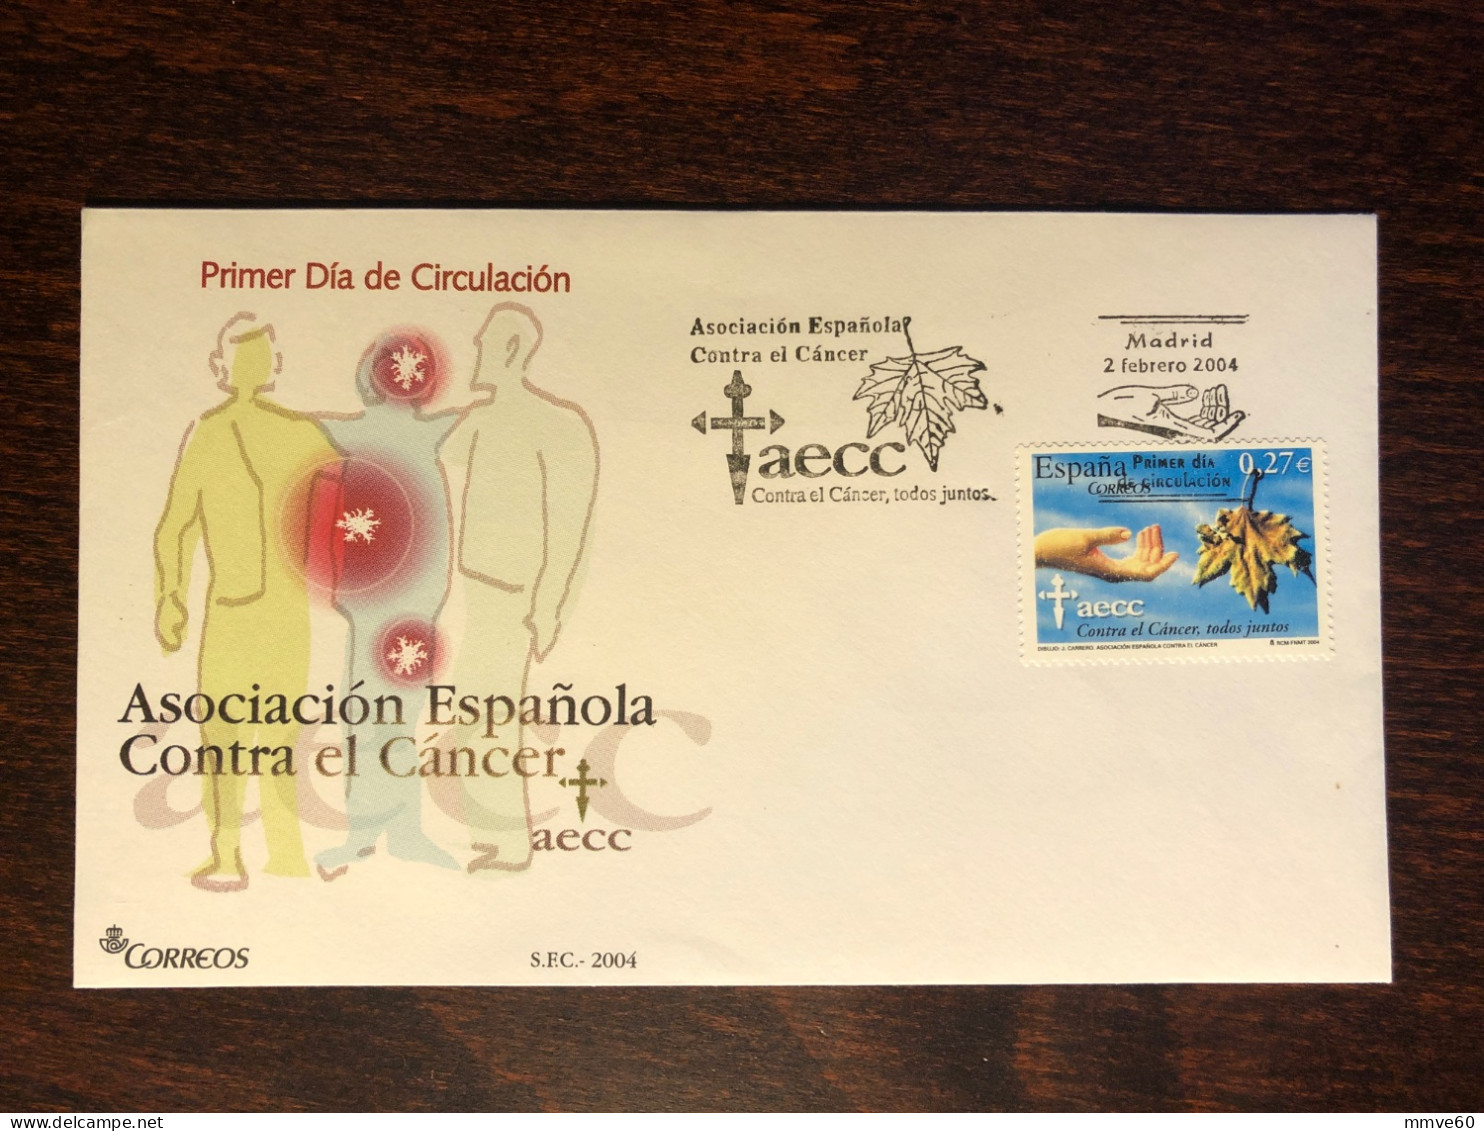 SPAIN FDC COVER 2004 YEAR CANCER ONCOLOGY HEALTH MEDICINE STAMPS - FDC